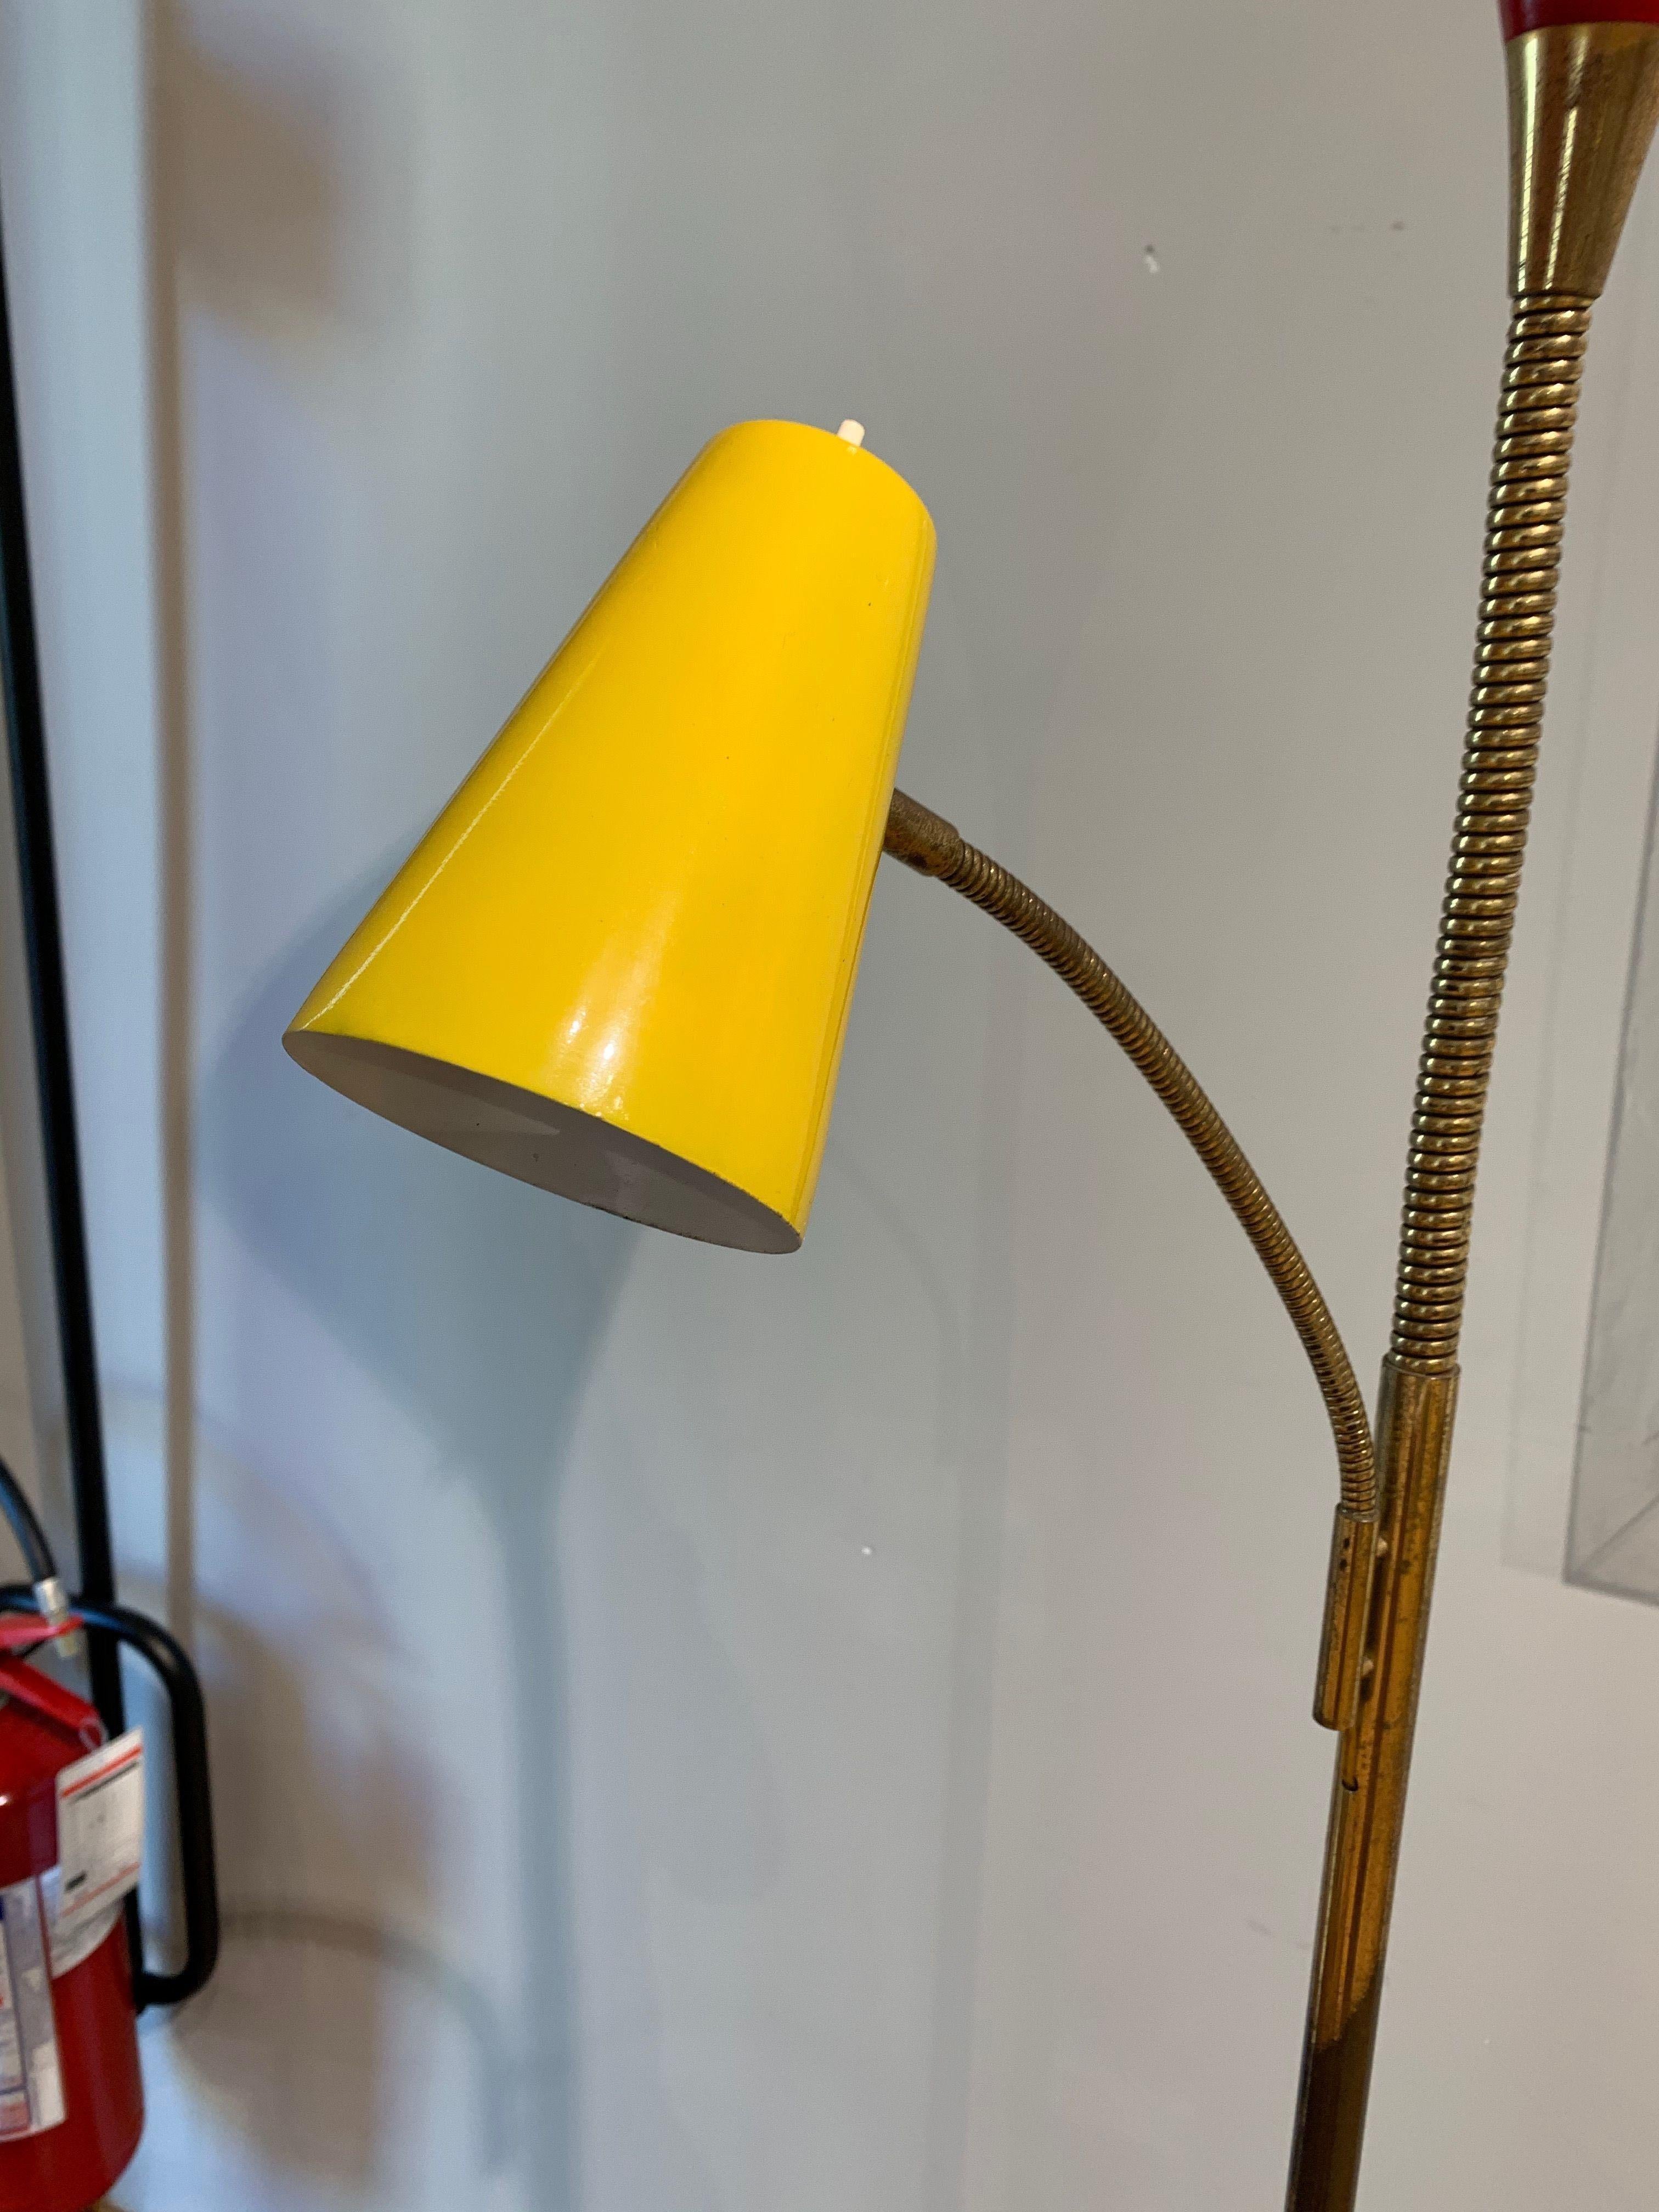 Gino Sarfatti rare floor lamp model 1044 with double reflector for direct light e indirect in lacquered metal, brass structure and base in white marble.
Produced by Arteluce, Italy, 1952
Measures: Height 190 cm
Published on lots of books the lamp